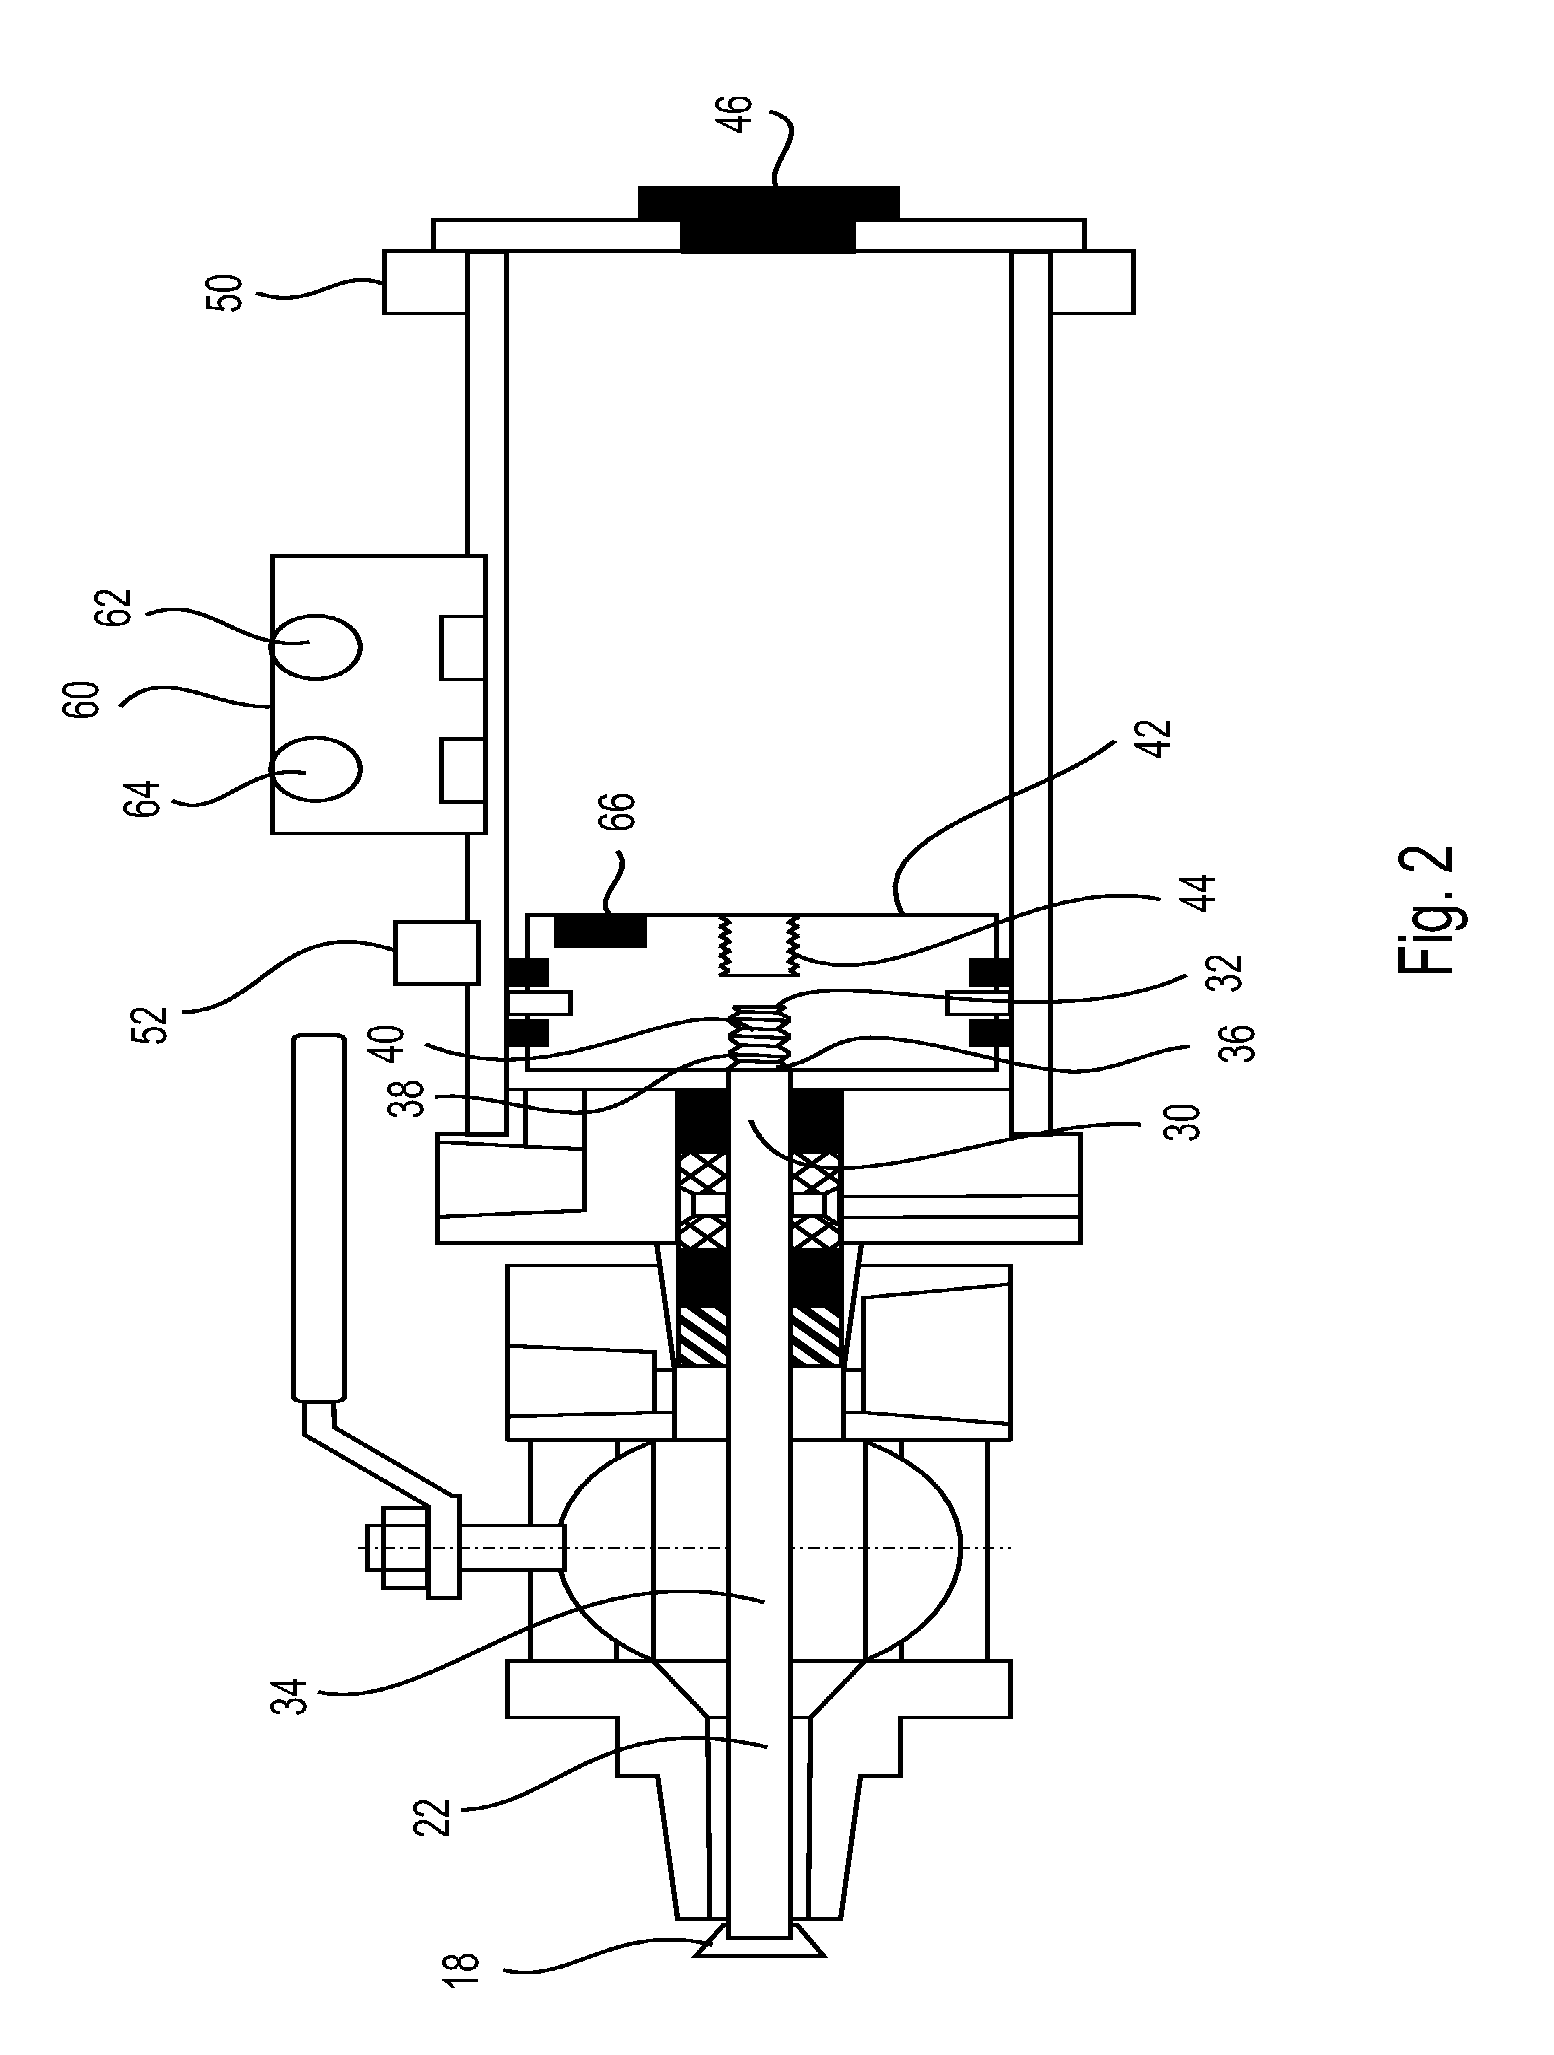 Tapping point clearing apparatus